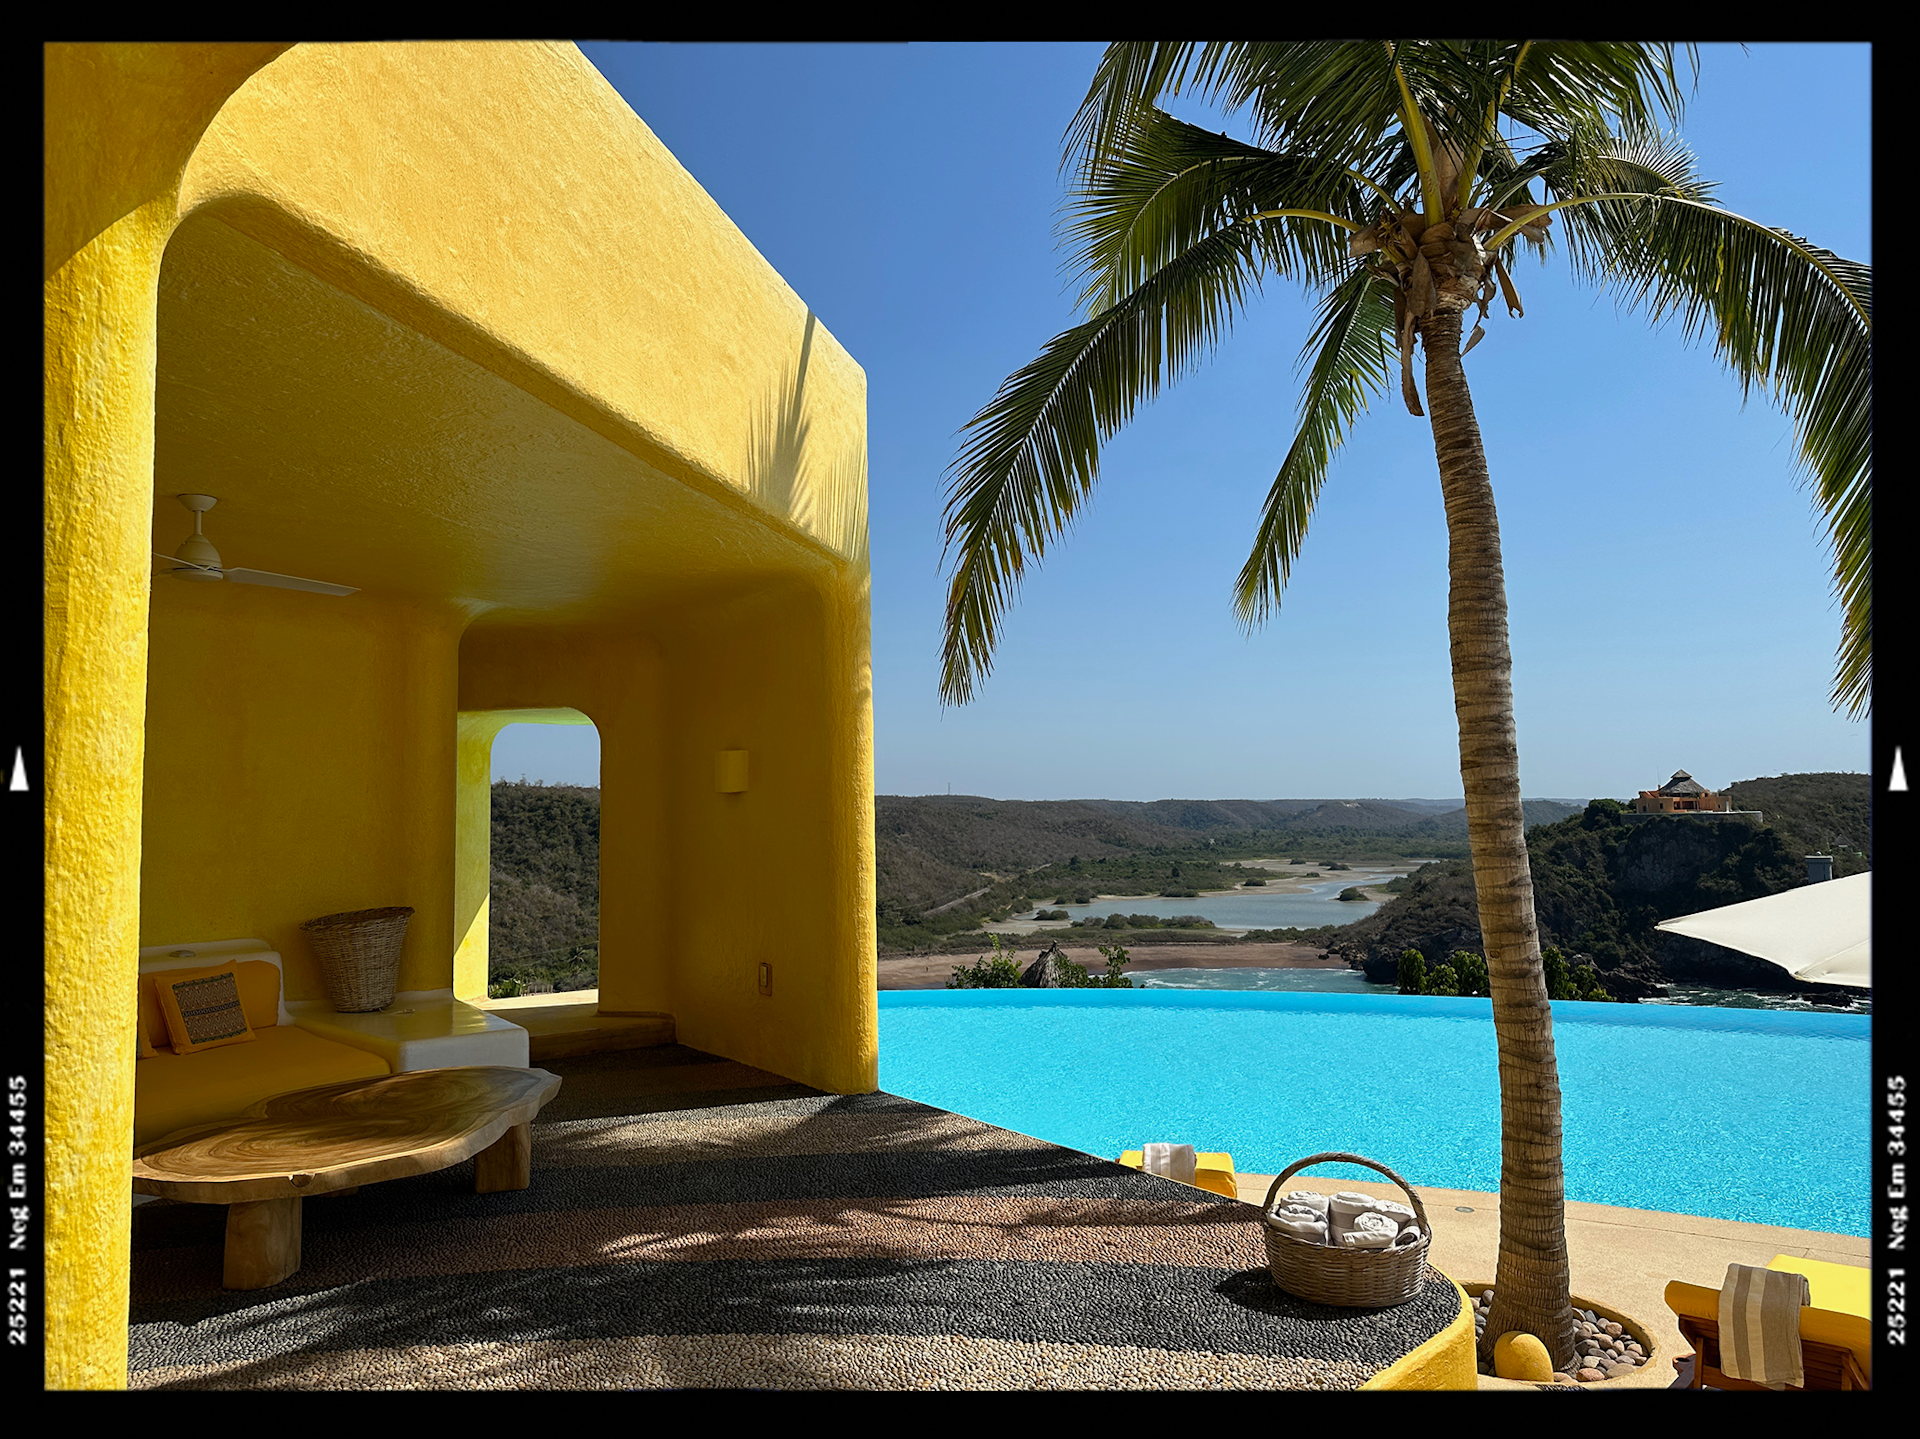 Cabana painted yellow in Mexico